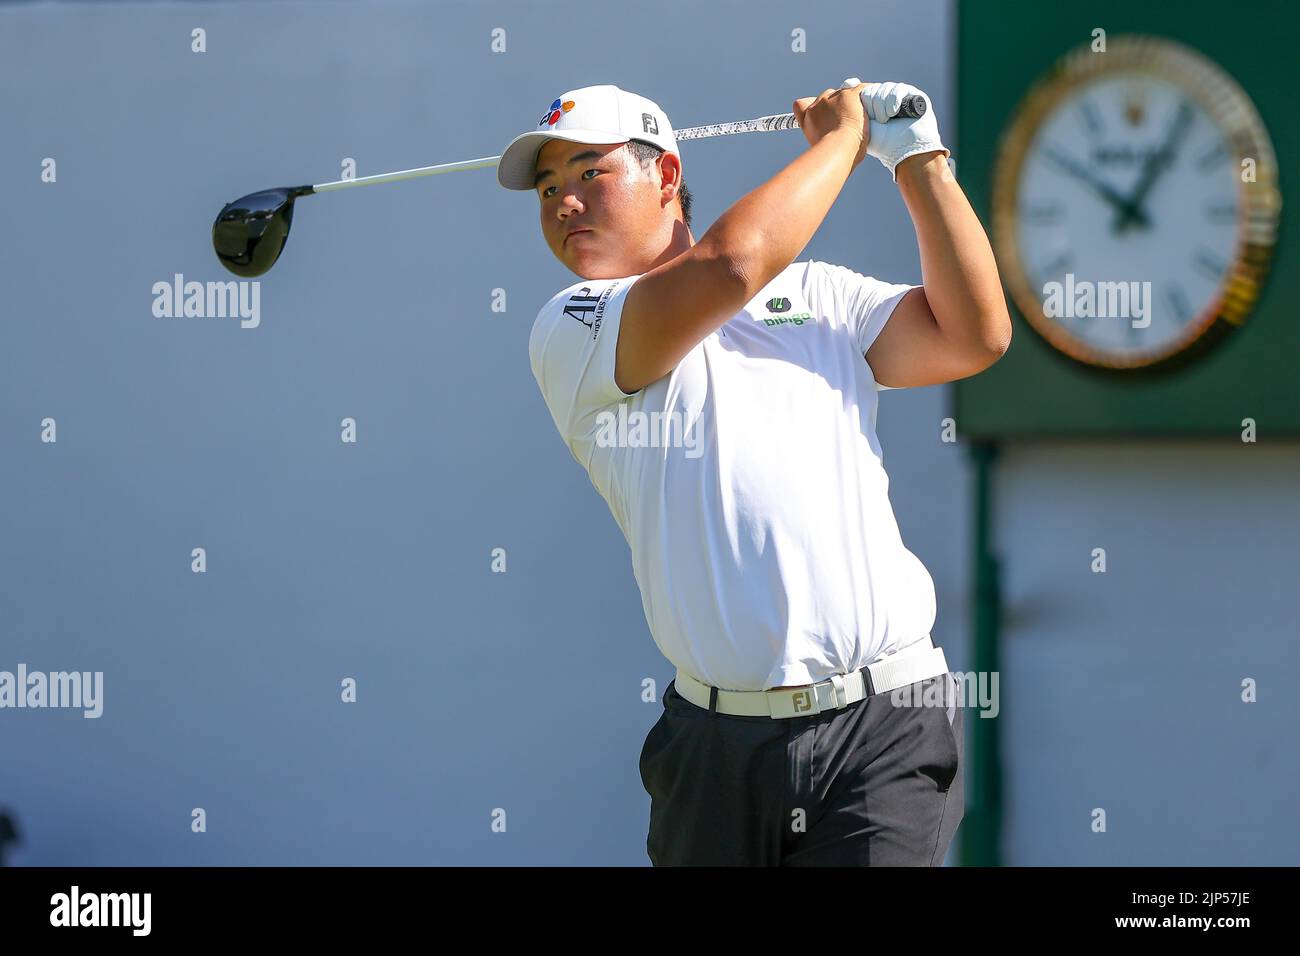 August 13, 2022: Joohyung Kim during the third round of the FedEx St. Jude Championship golf tournament at TPC Southwind in Memphis, TN. Gray Siegel/Cal Sport Media Stock Photo